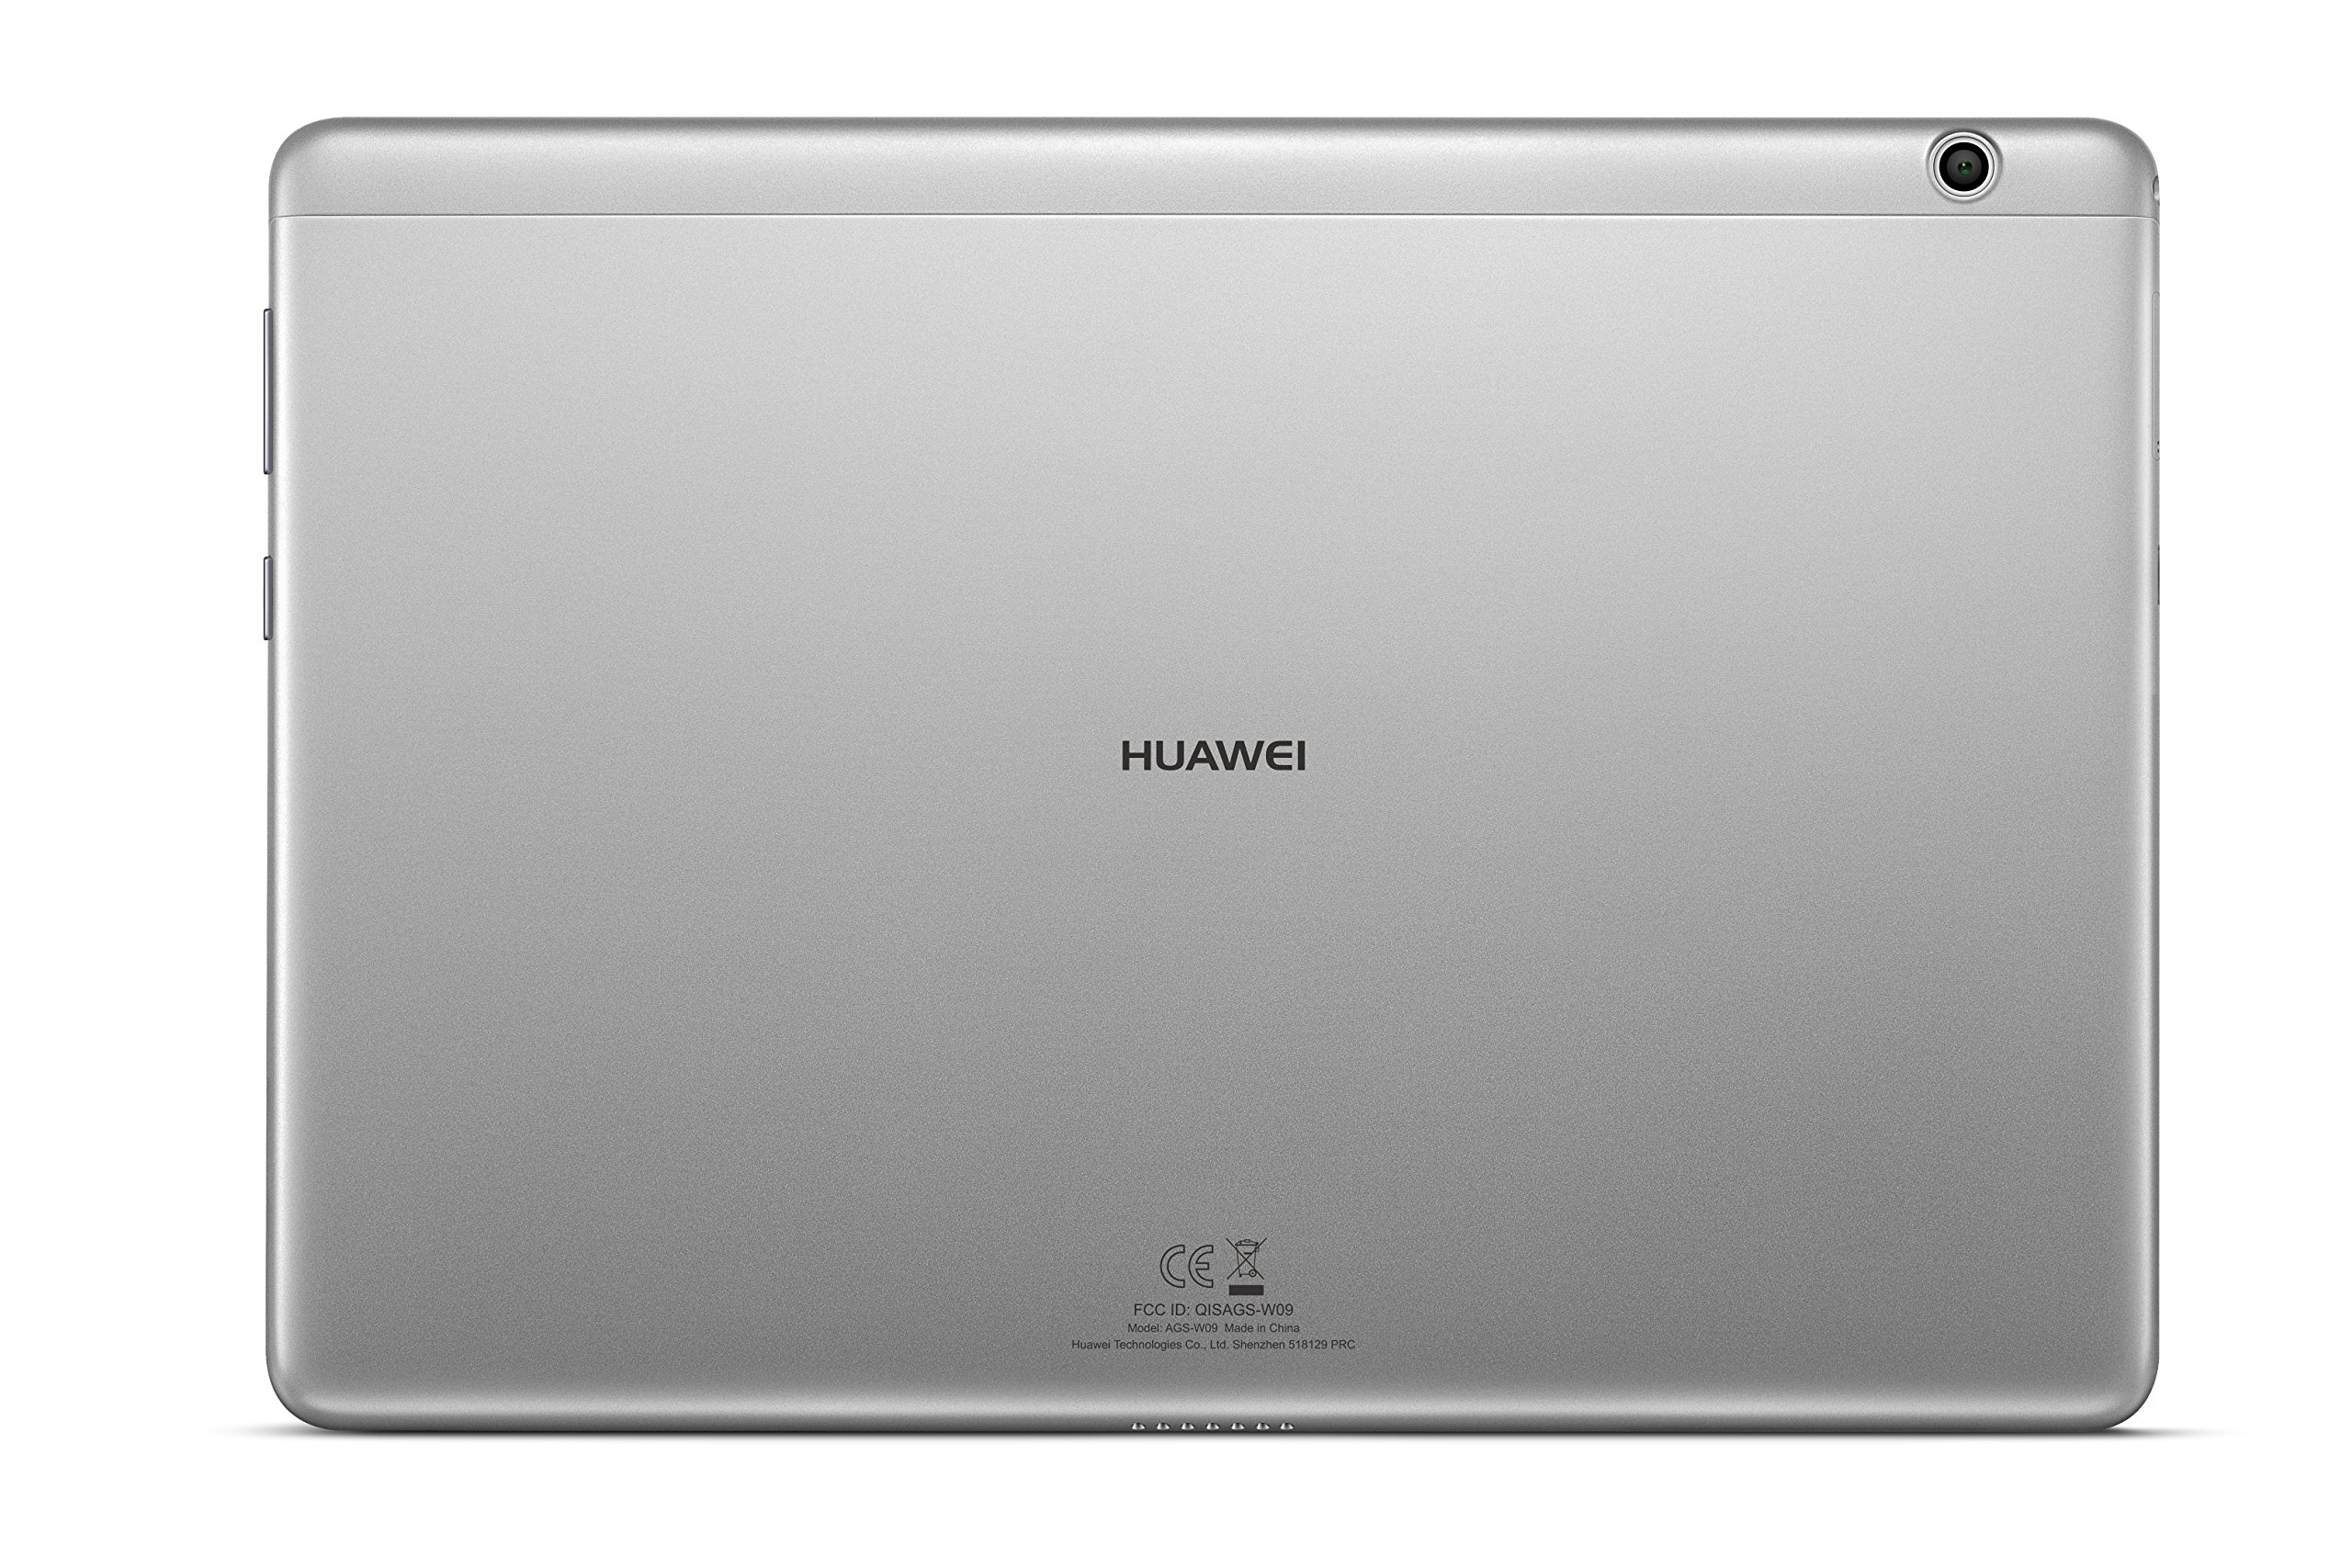 HUAWEI Agassi-W09 Mediapad T3 10 2+16 Quad-Core 1.4GHz, Android N + EMUI 5.1